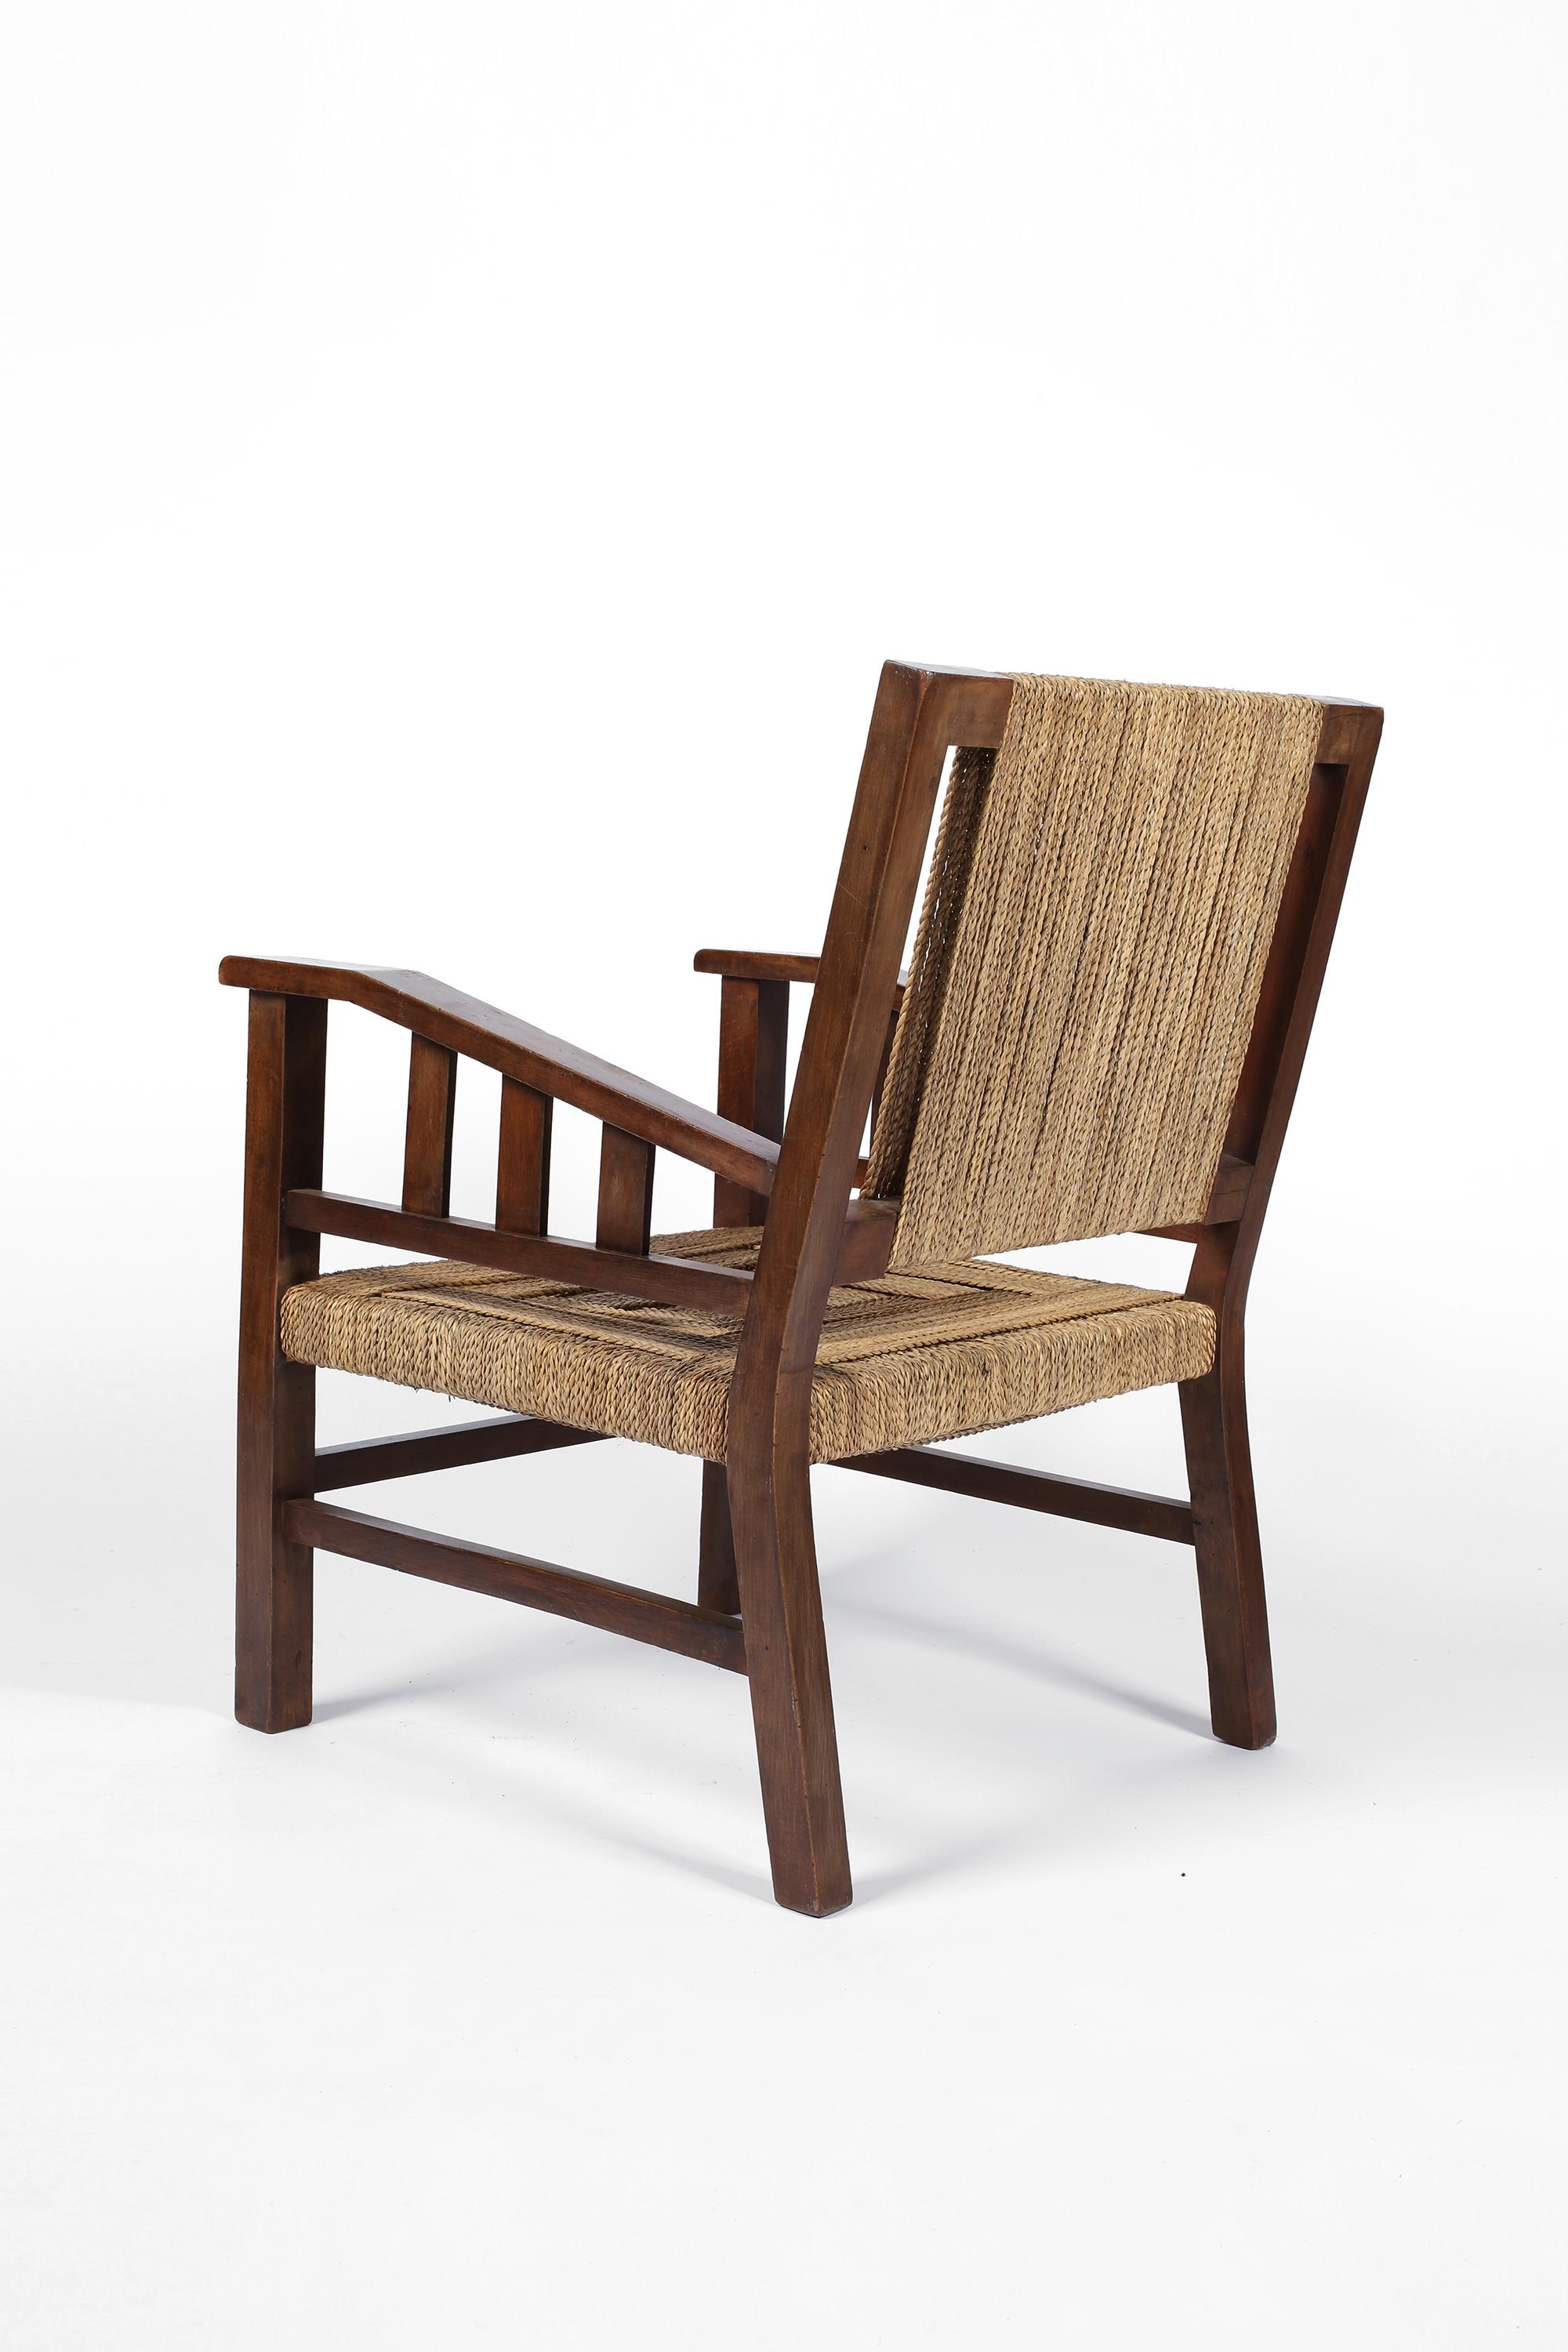 Hand-Woven Pair of Francis Jourdain Armchairs in Beech and Seagrass, French, circa 1930s